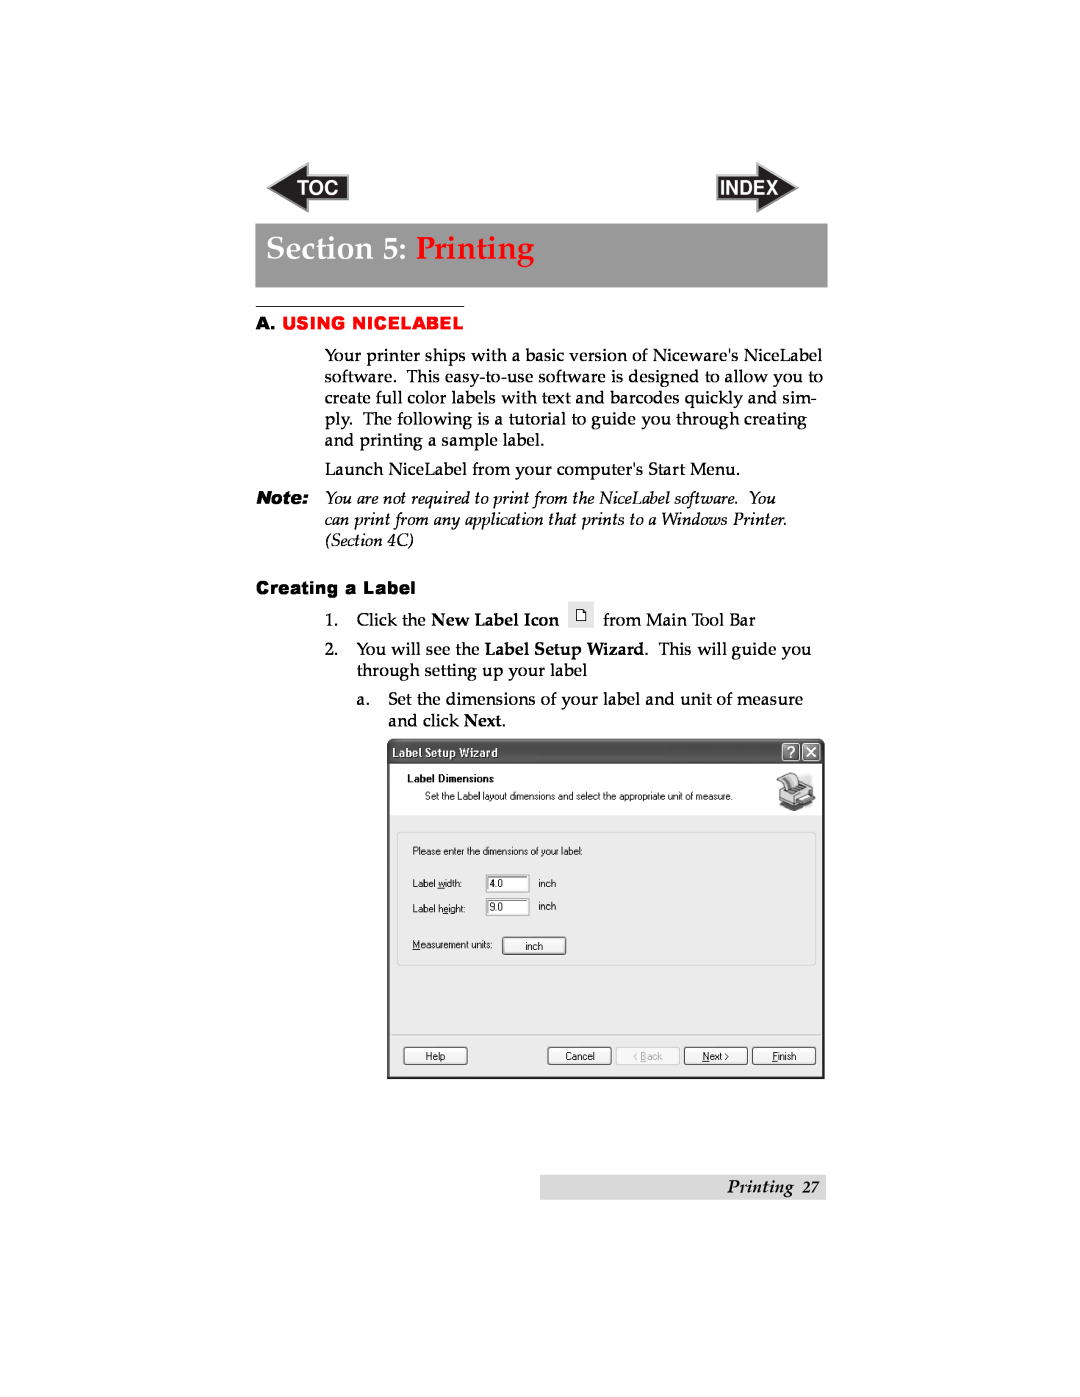 Primera Technology RX900 user manual Printing, A. Using Nicelabel, Creating a Label, Index 